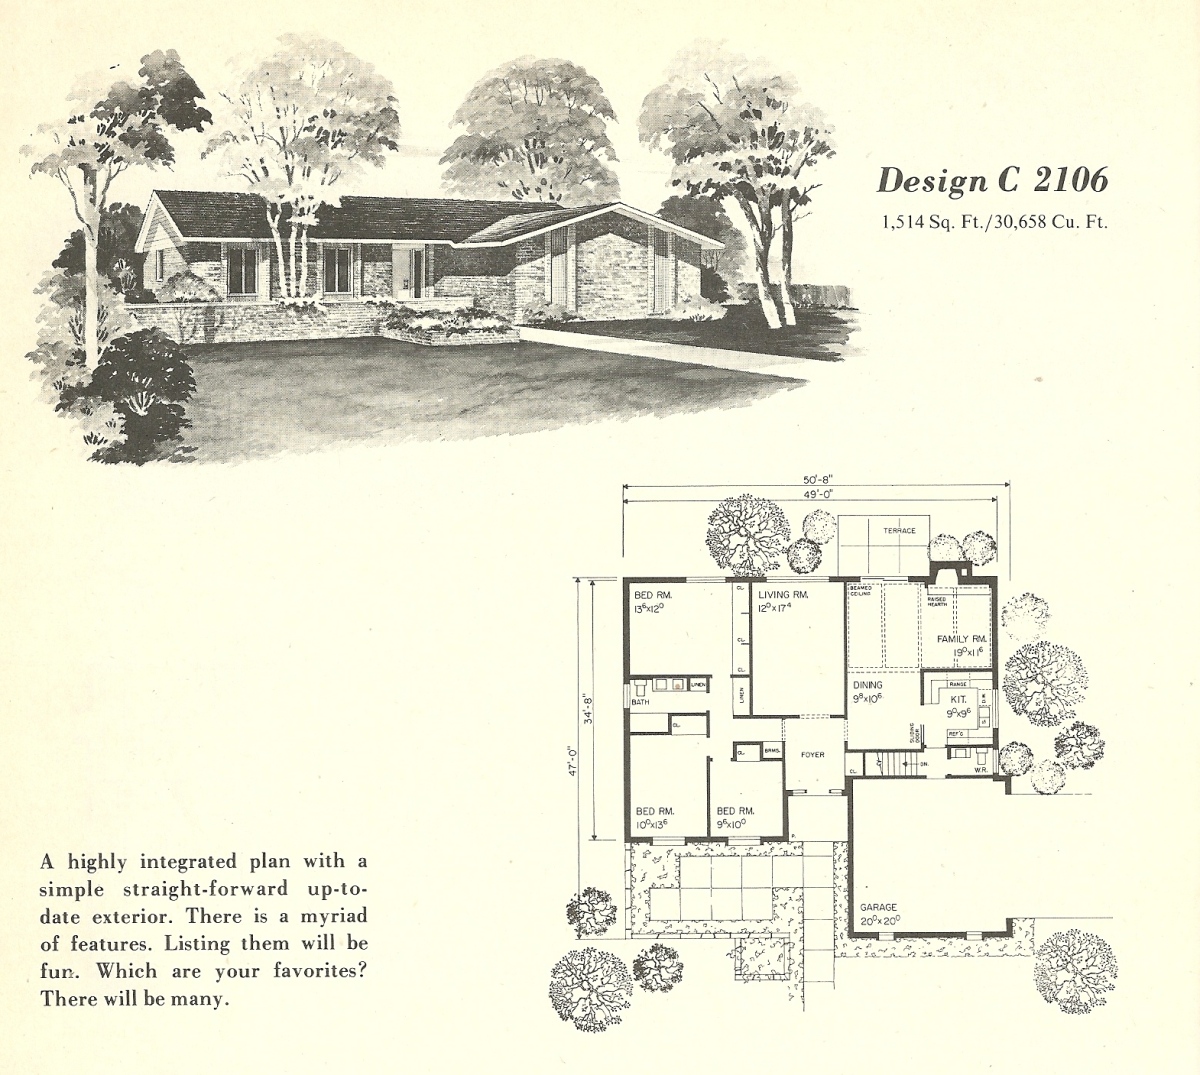 Vintage House Plans, Mid Century Homes, 1960s Houses